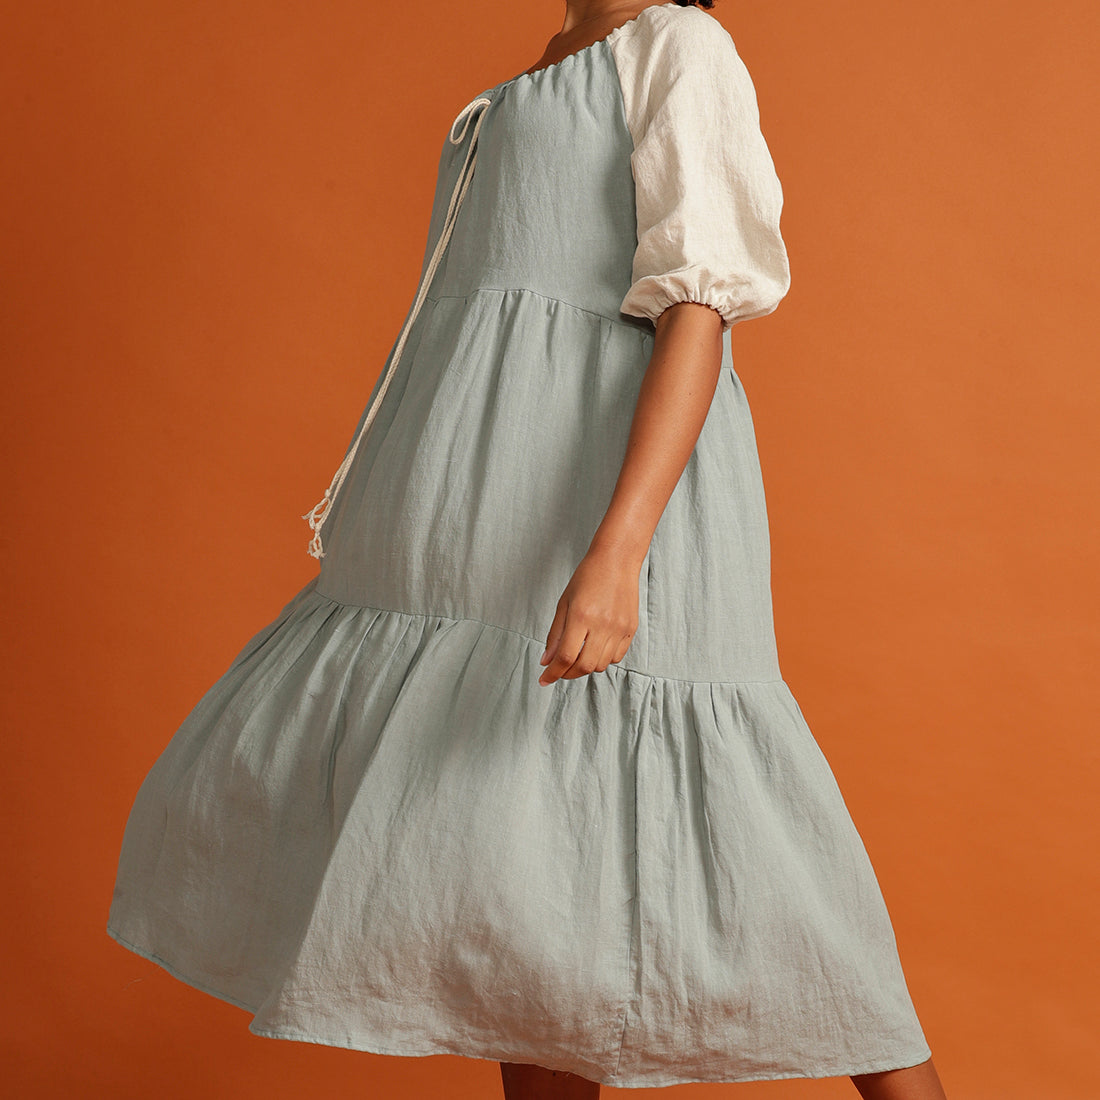 Tiered sage and natural linen dress